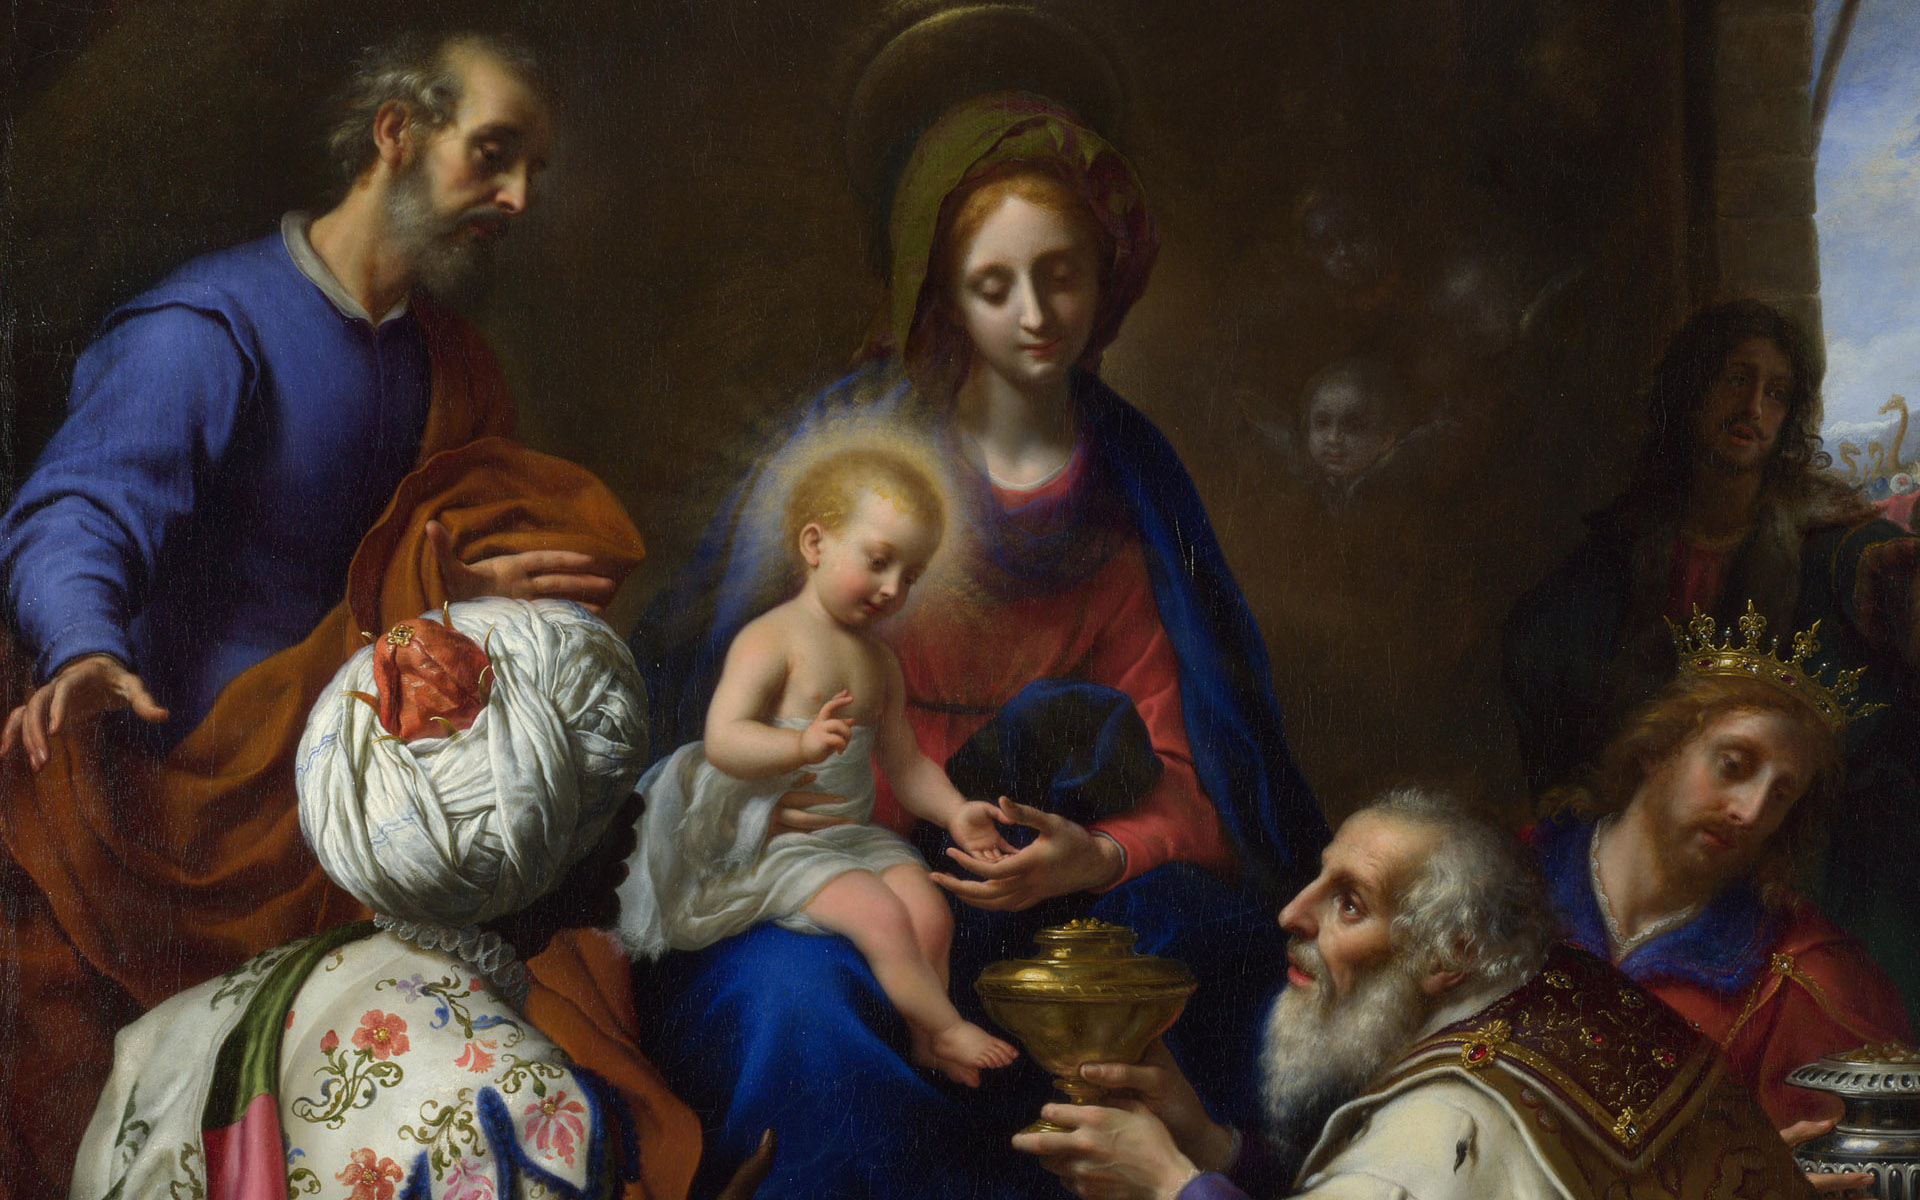 The Adoration of the Kings by Carlo Dolci